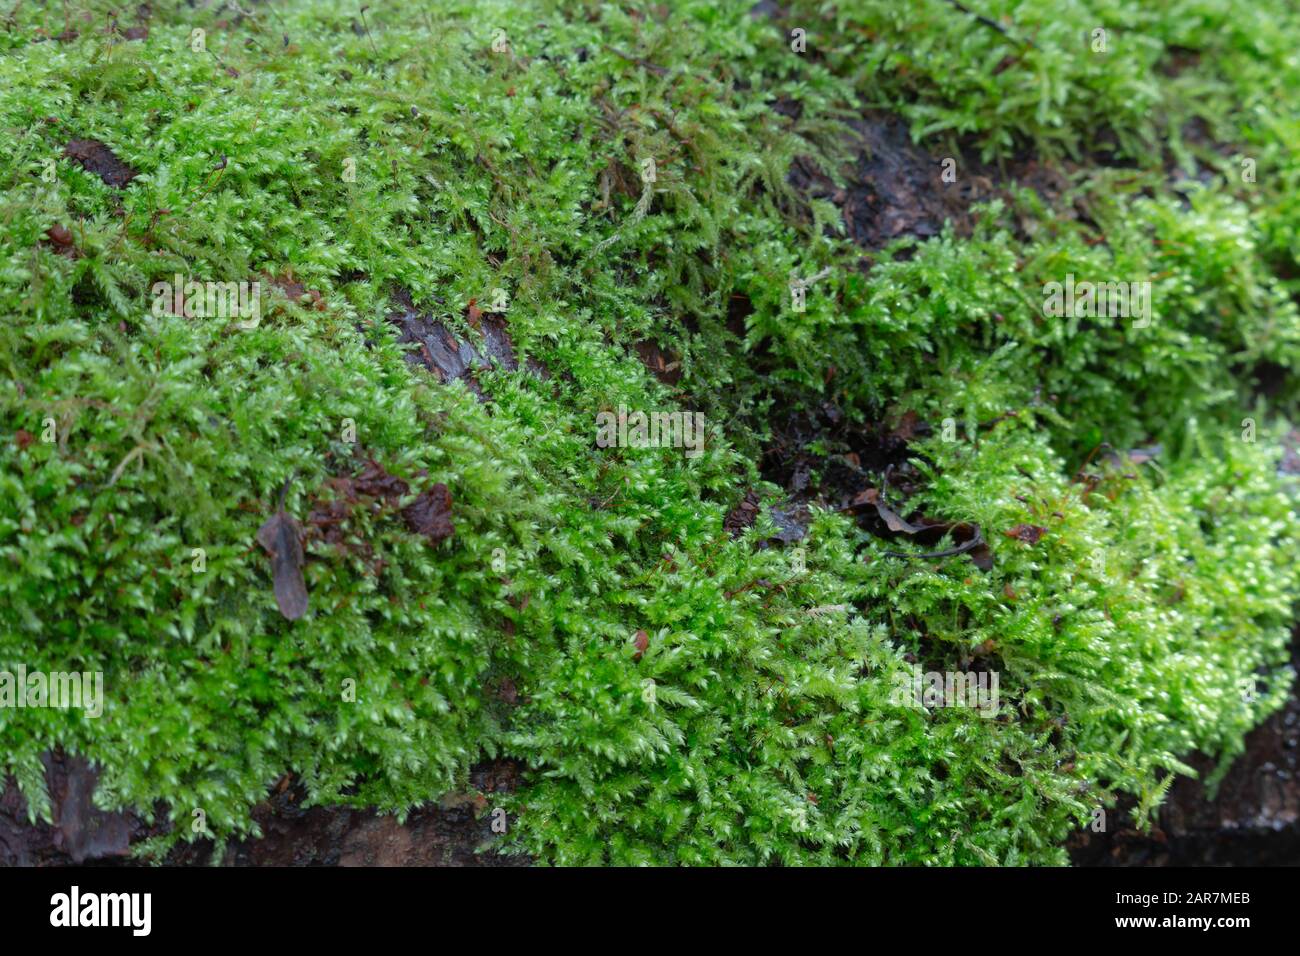 Dicranella heteromalla moss growing on the tree in the forest Stock Photo